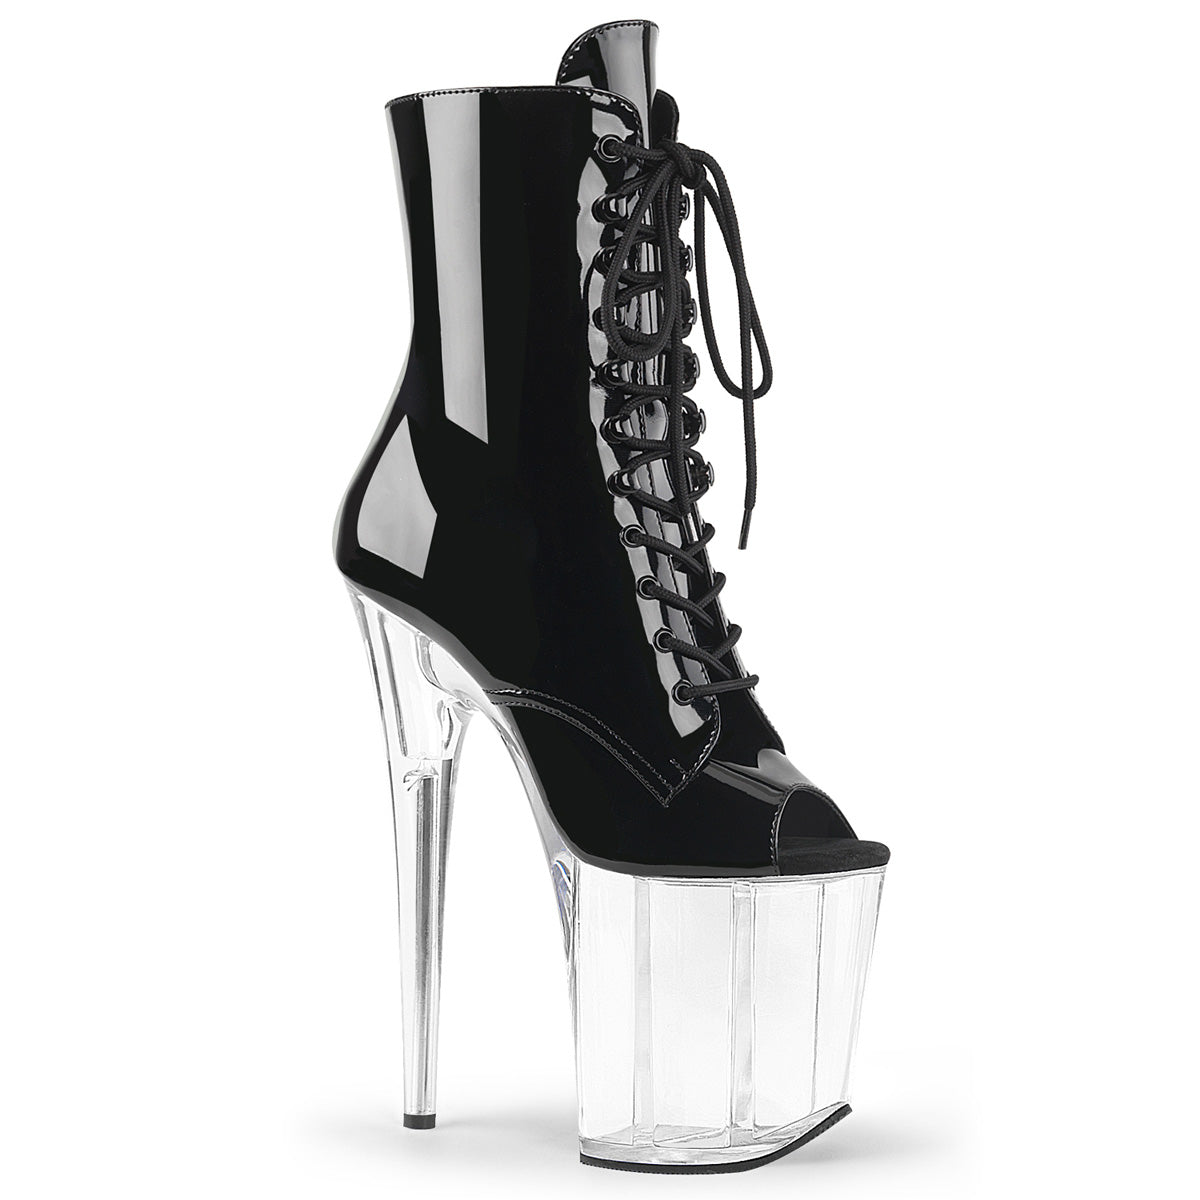 FLAMINGO-1021 Black/Clear Ankle Boots